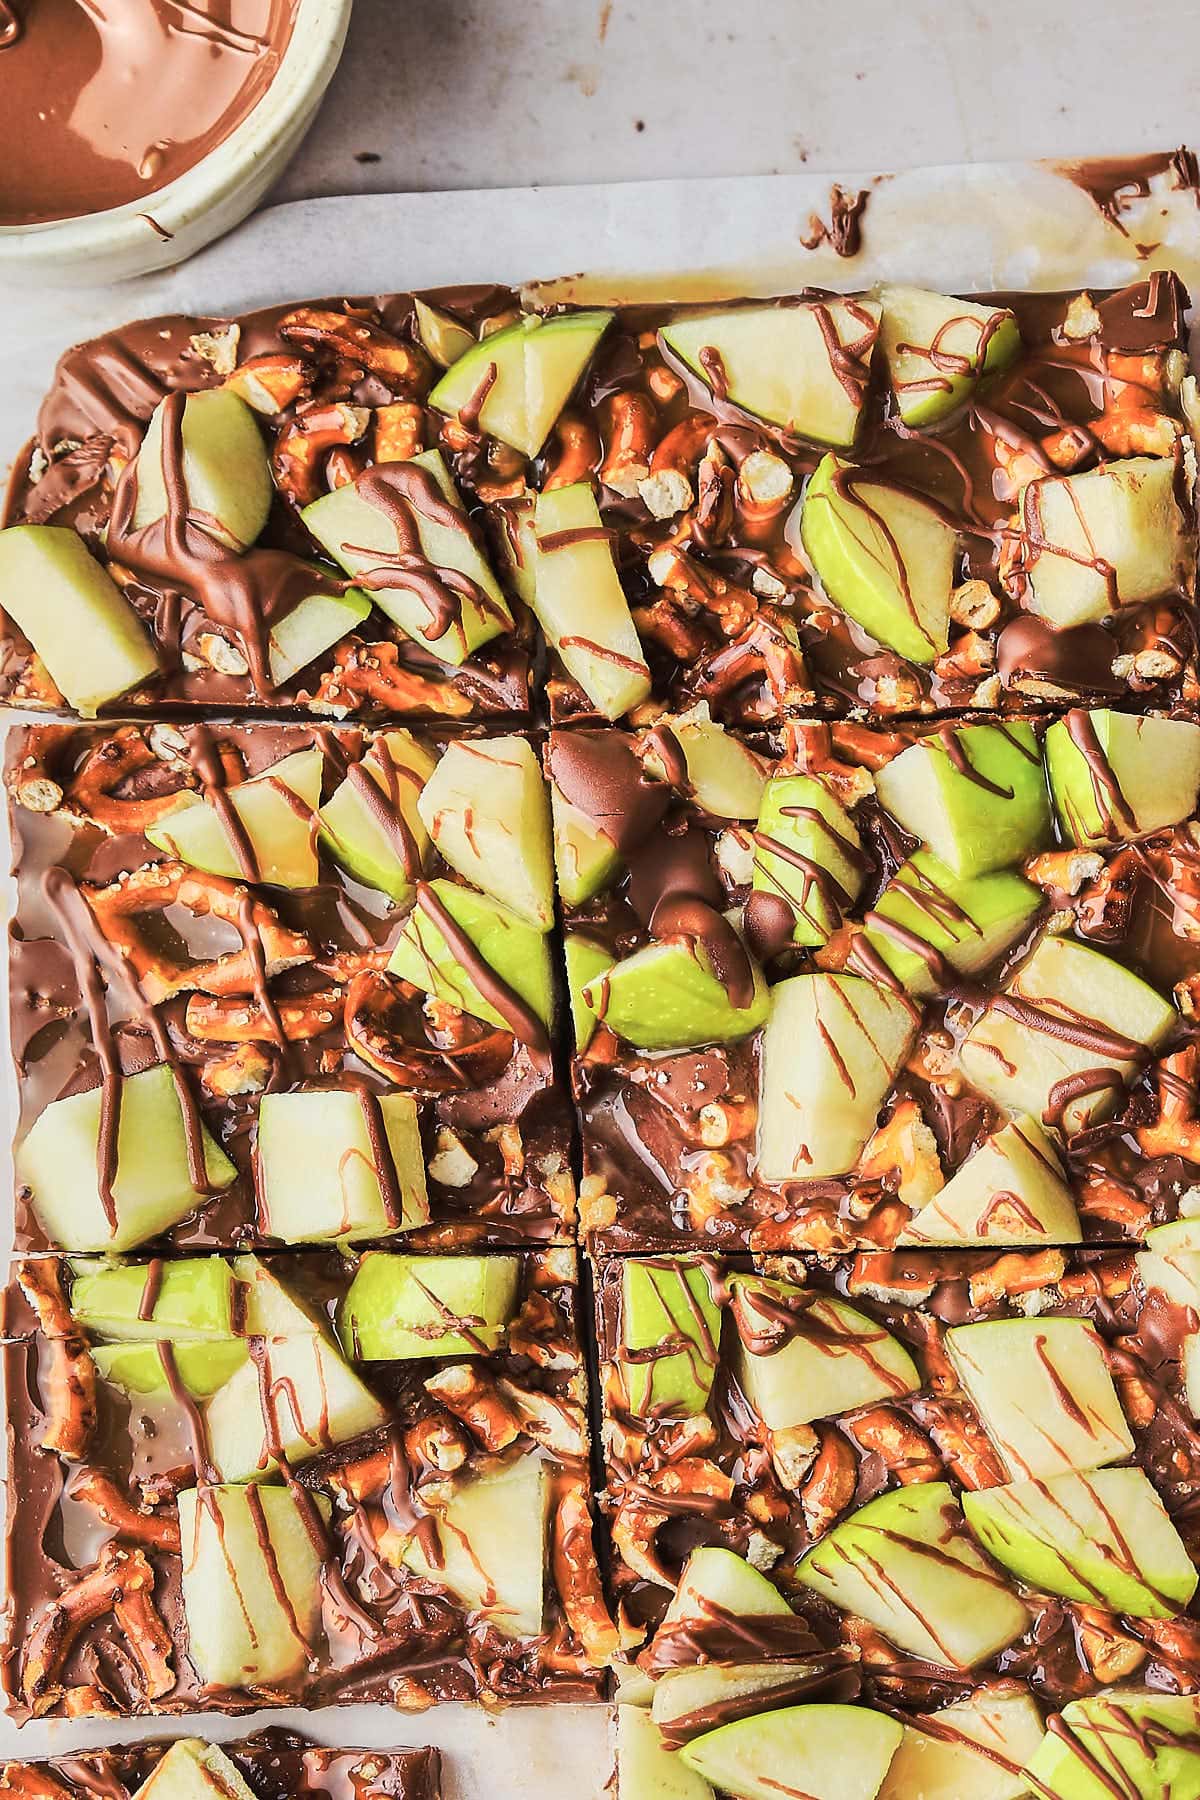 a close up photo of the chocolate bark